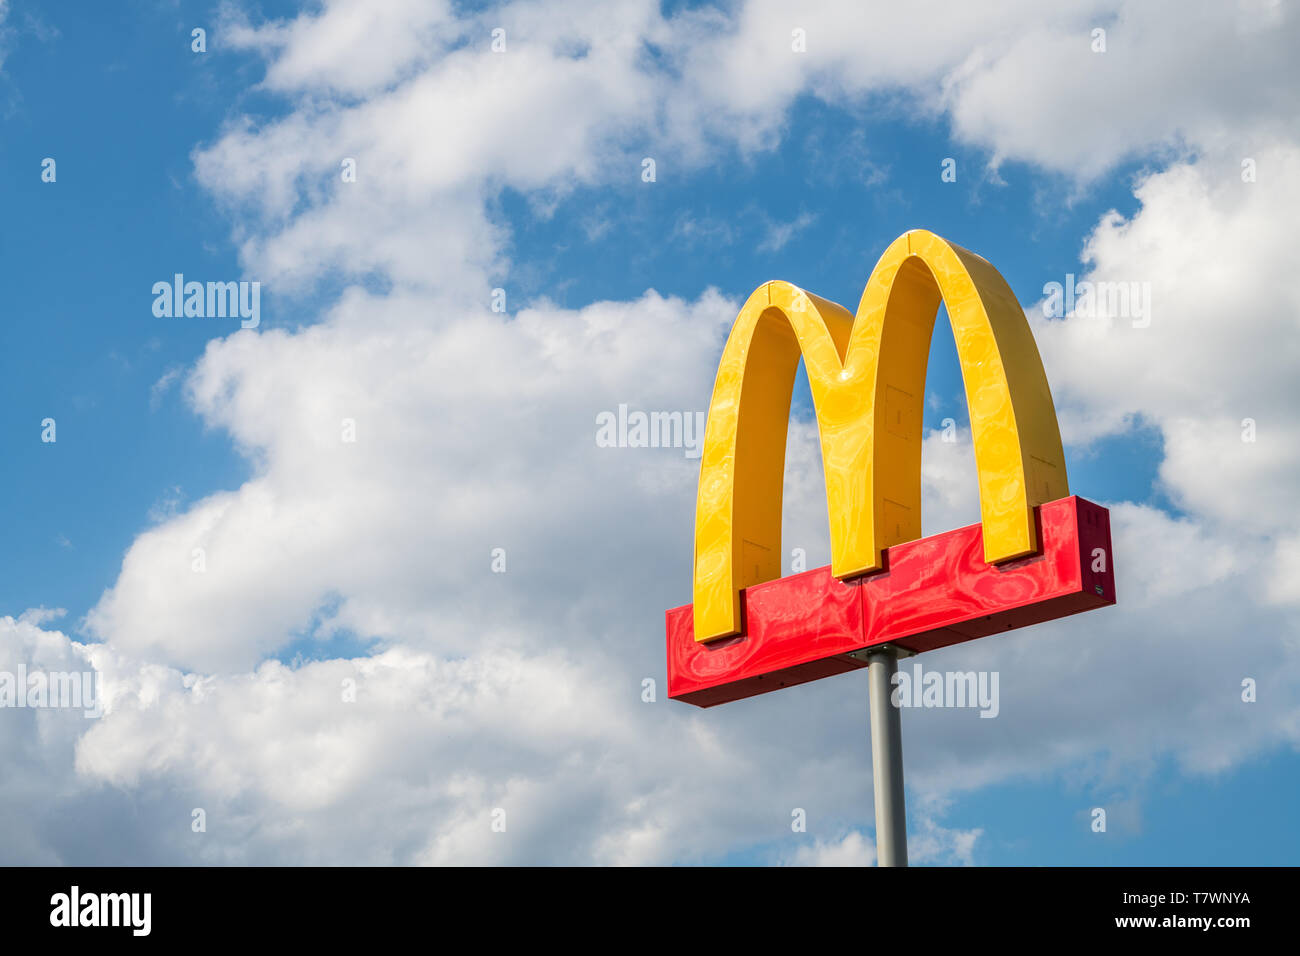 McDonalds sign isolated against cloudy blue sky Stock Photo